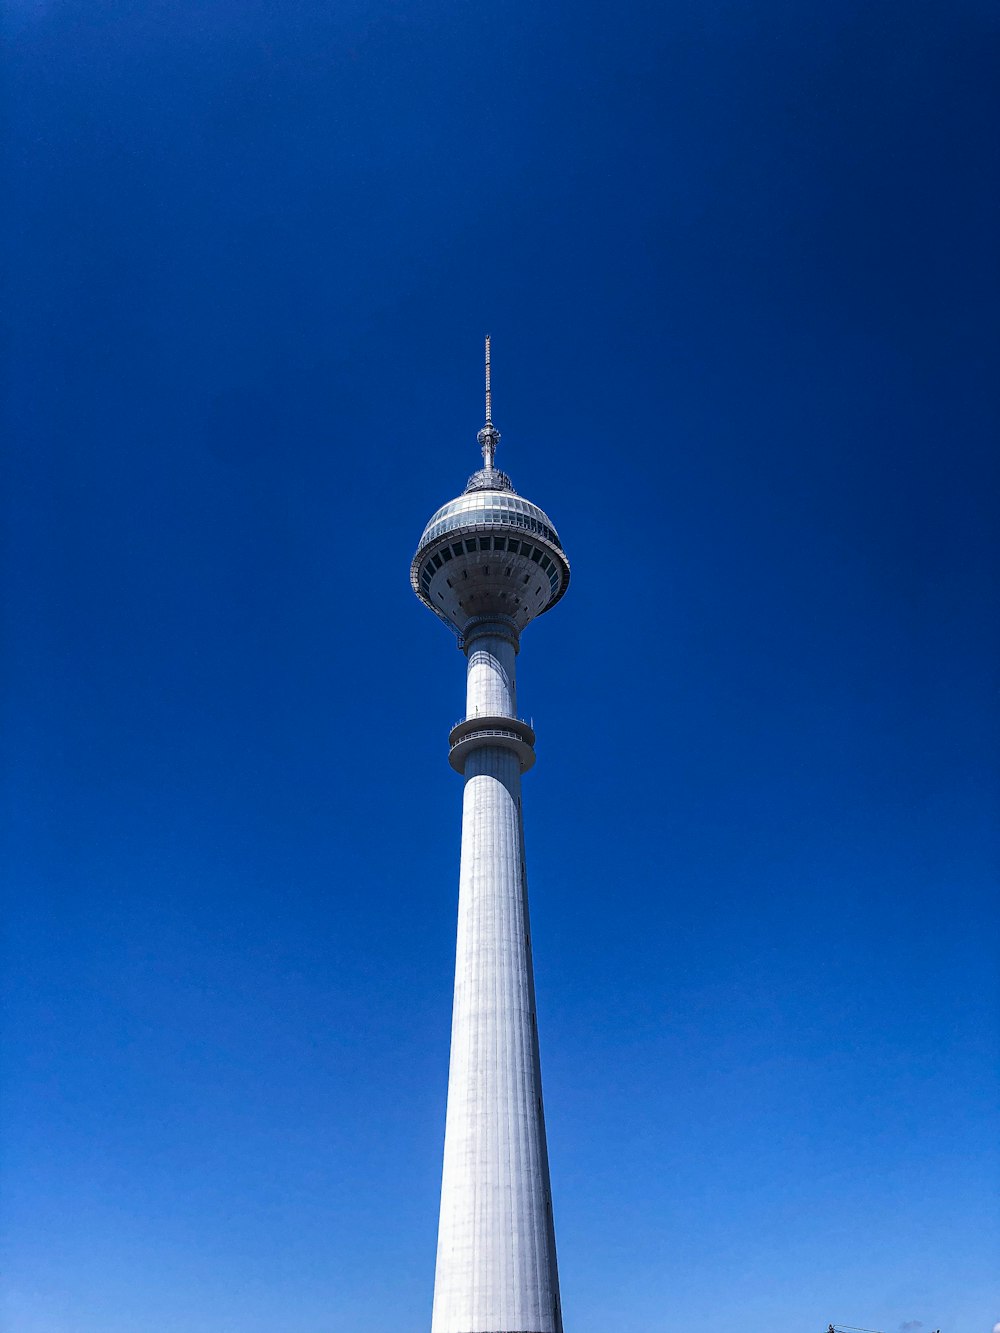 white and blue tower under blue sky during daytime